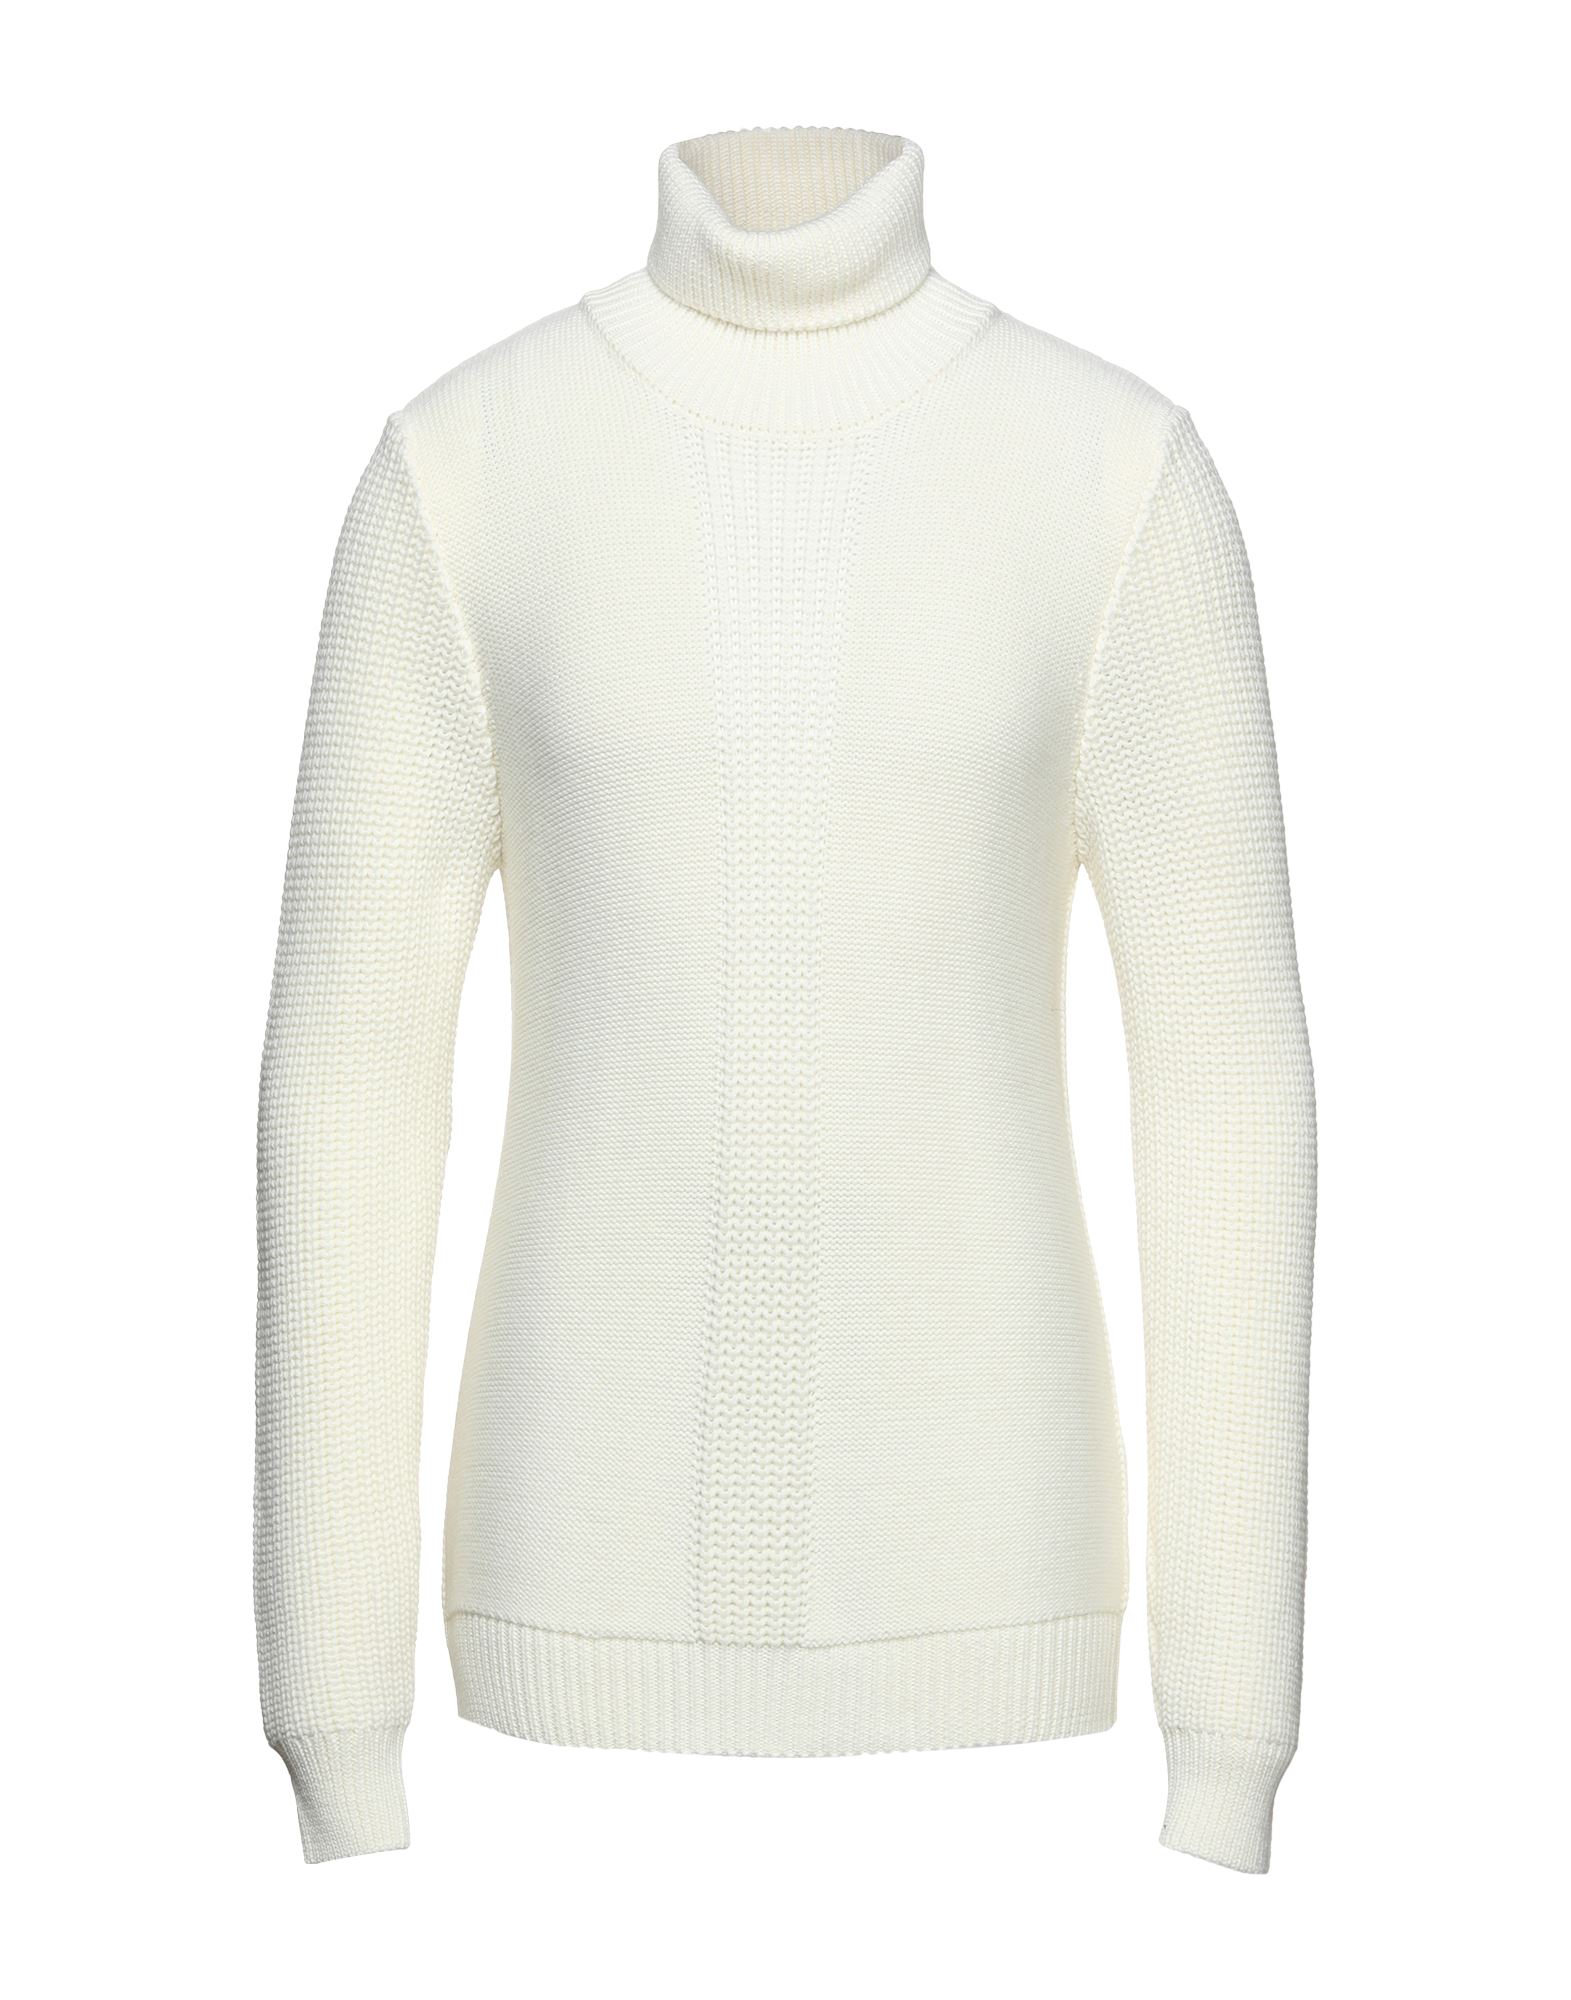 BRIAN DALES BRIAN DALES MAN TURTLENECK IVORY SIZE S WOOL, ACRYLIC,14113665PX 6